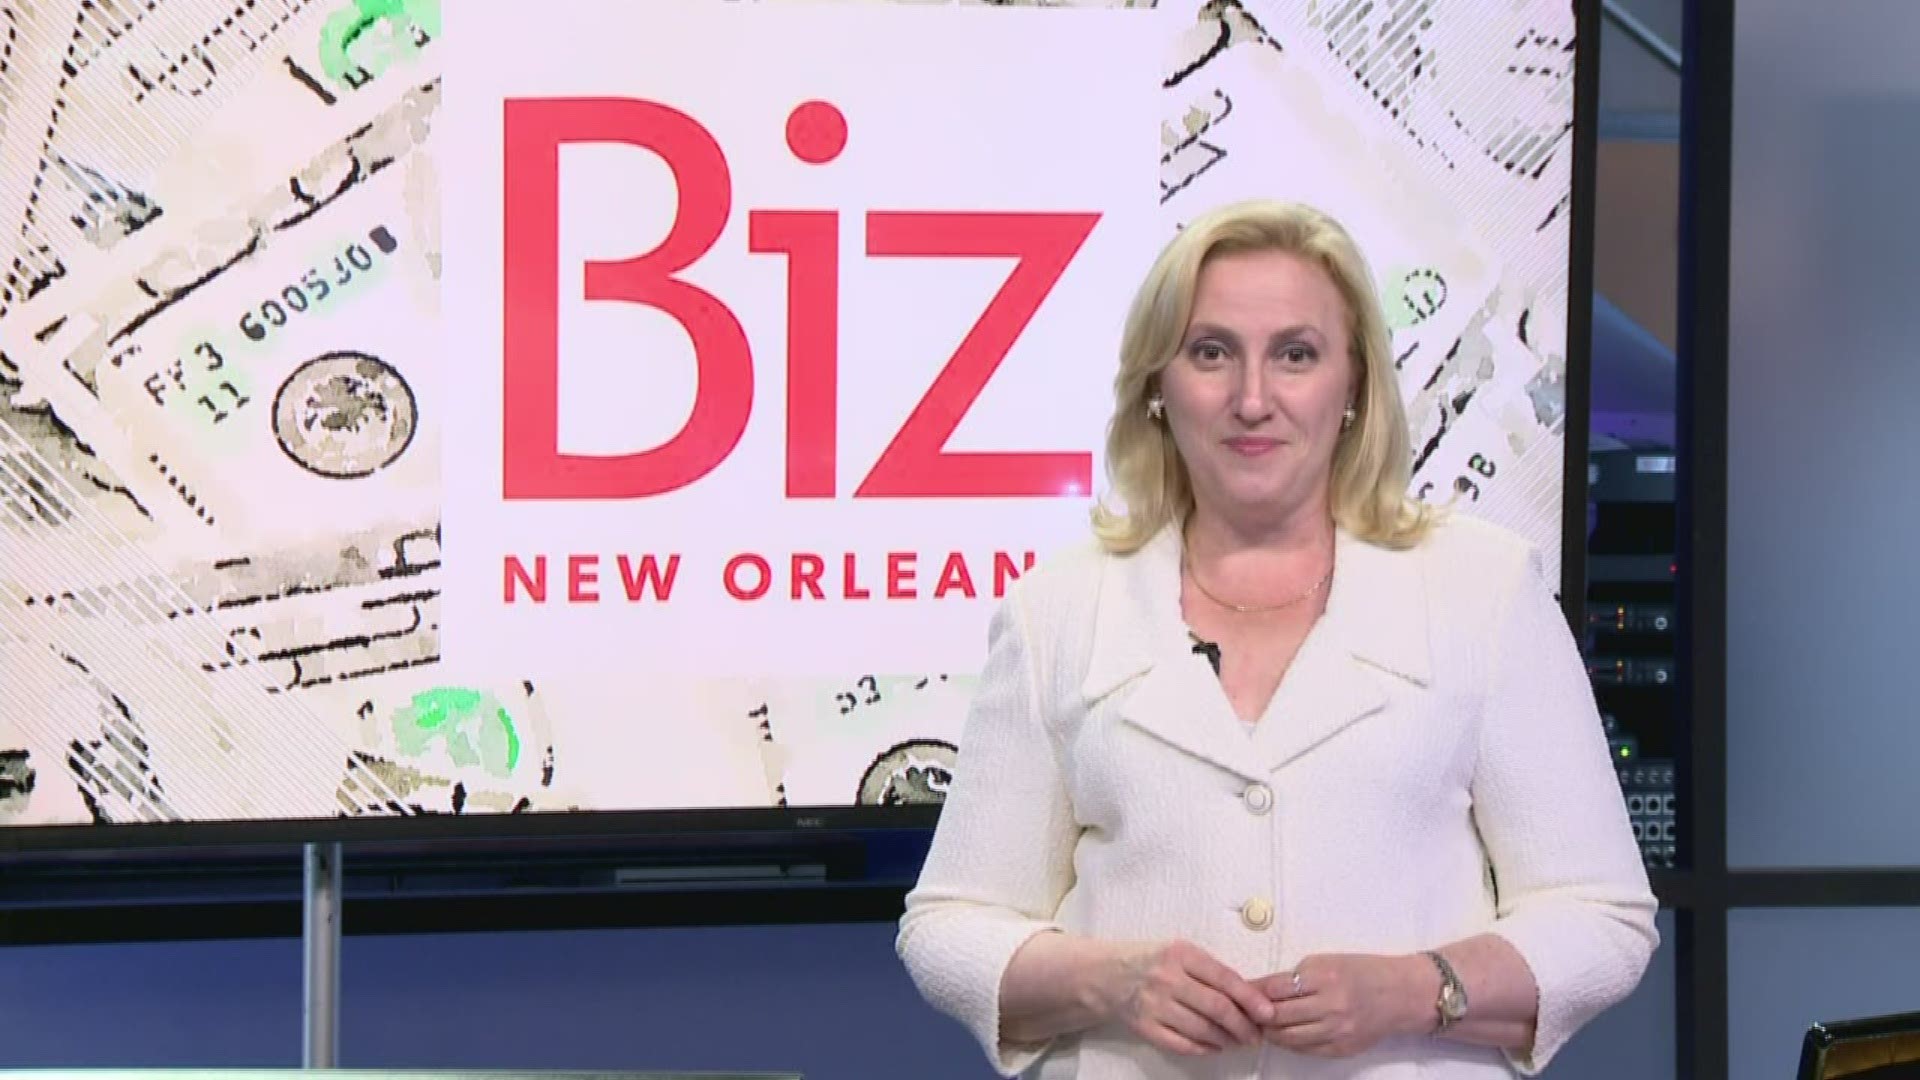 There seem to be more and more ways to protect your financial information and prevent hackers from stealing your money, but security breaches still happen. BizNewOrleans.com's Leslie Snadowsky has some advice on how a strong offense can be your best defense against financial fraud.